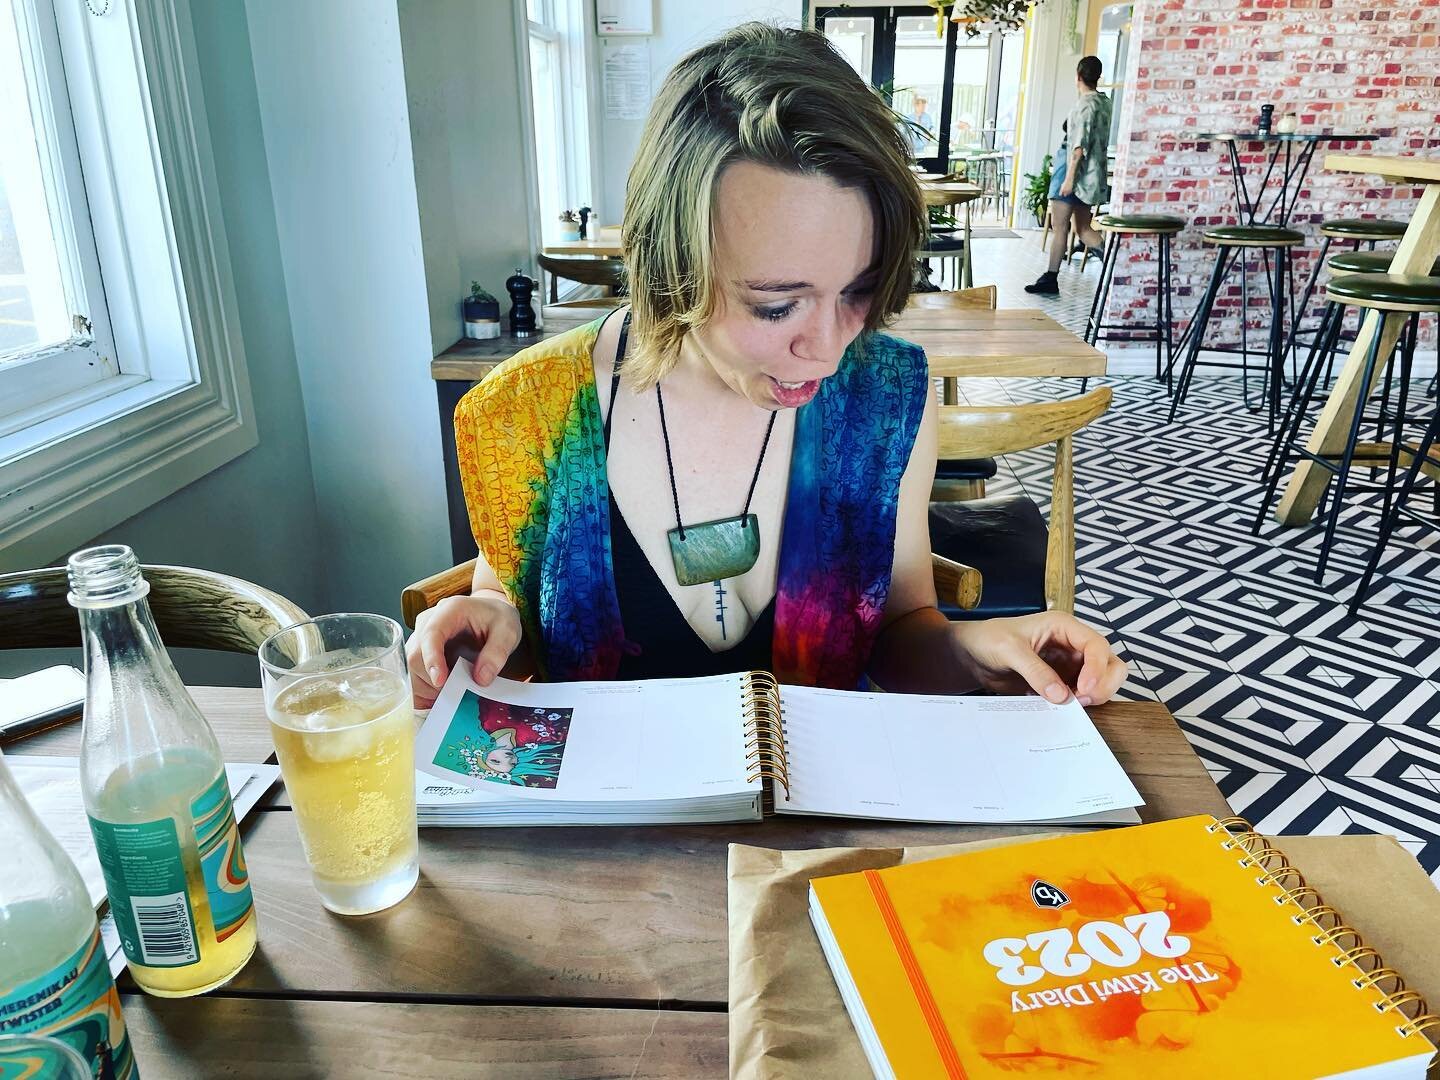 So much joy giving beautiful Ciara her comp diary!! We yarned for hours and even jumped in the ocean! #summer 

Ciara contributed gorgeous poetry to Kiwi diary 2023&hellip; have you seen it? 

Excited also about thinking caps going on for @the.kiwidi